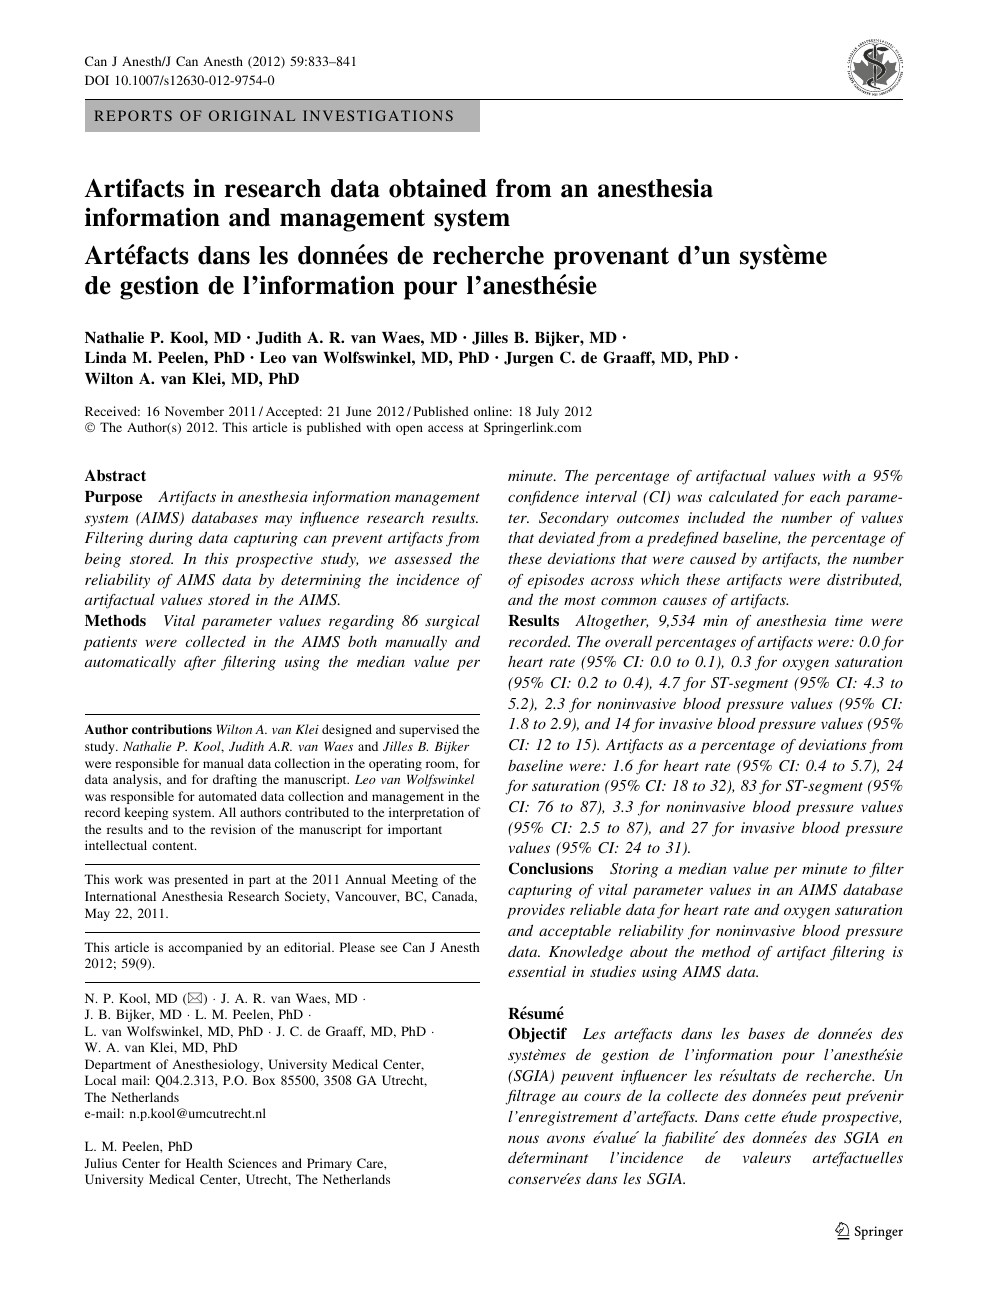 Artifacts In Research Data Obtained From An Anesthesia Information And Management System Topic Of Research Paper In Medical Engineering Download Scholarly Article Pdf And Read For Free On Cyberleninka Open Science